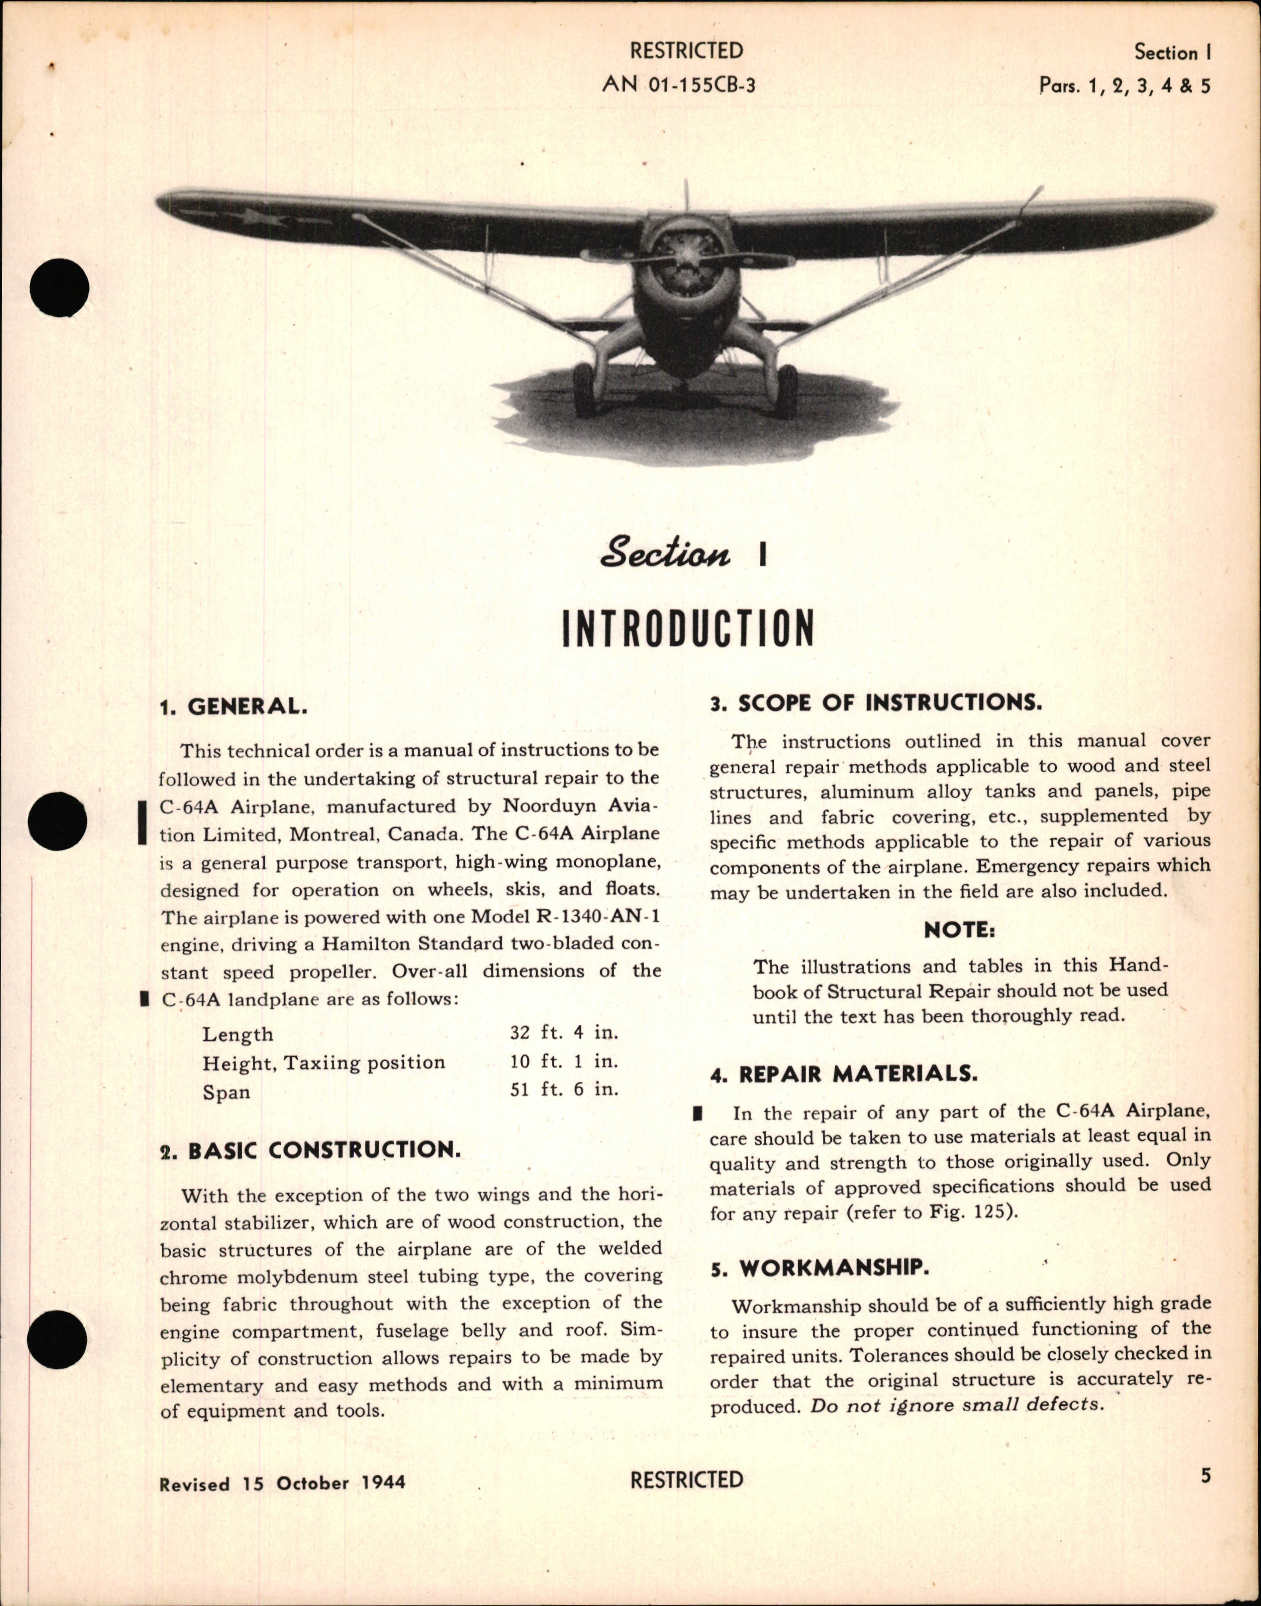 Sample page 7 from AirCorps Library document: Structural Repair Instructions for C-64A